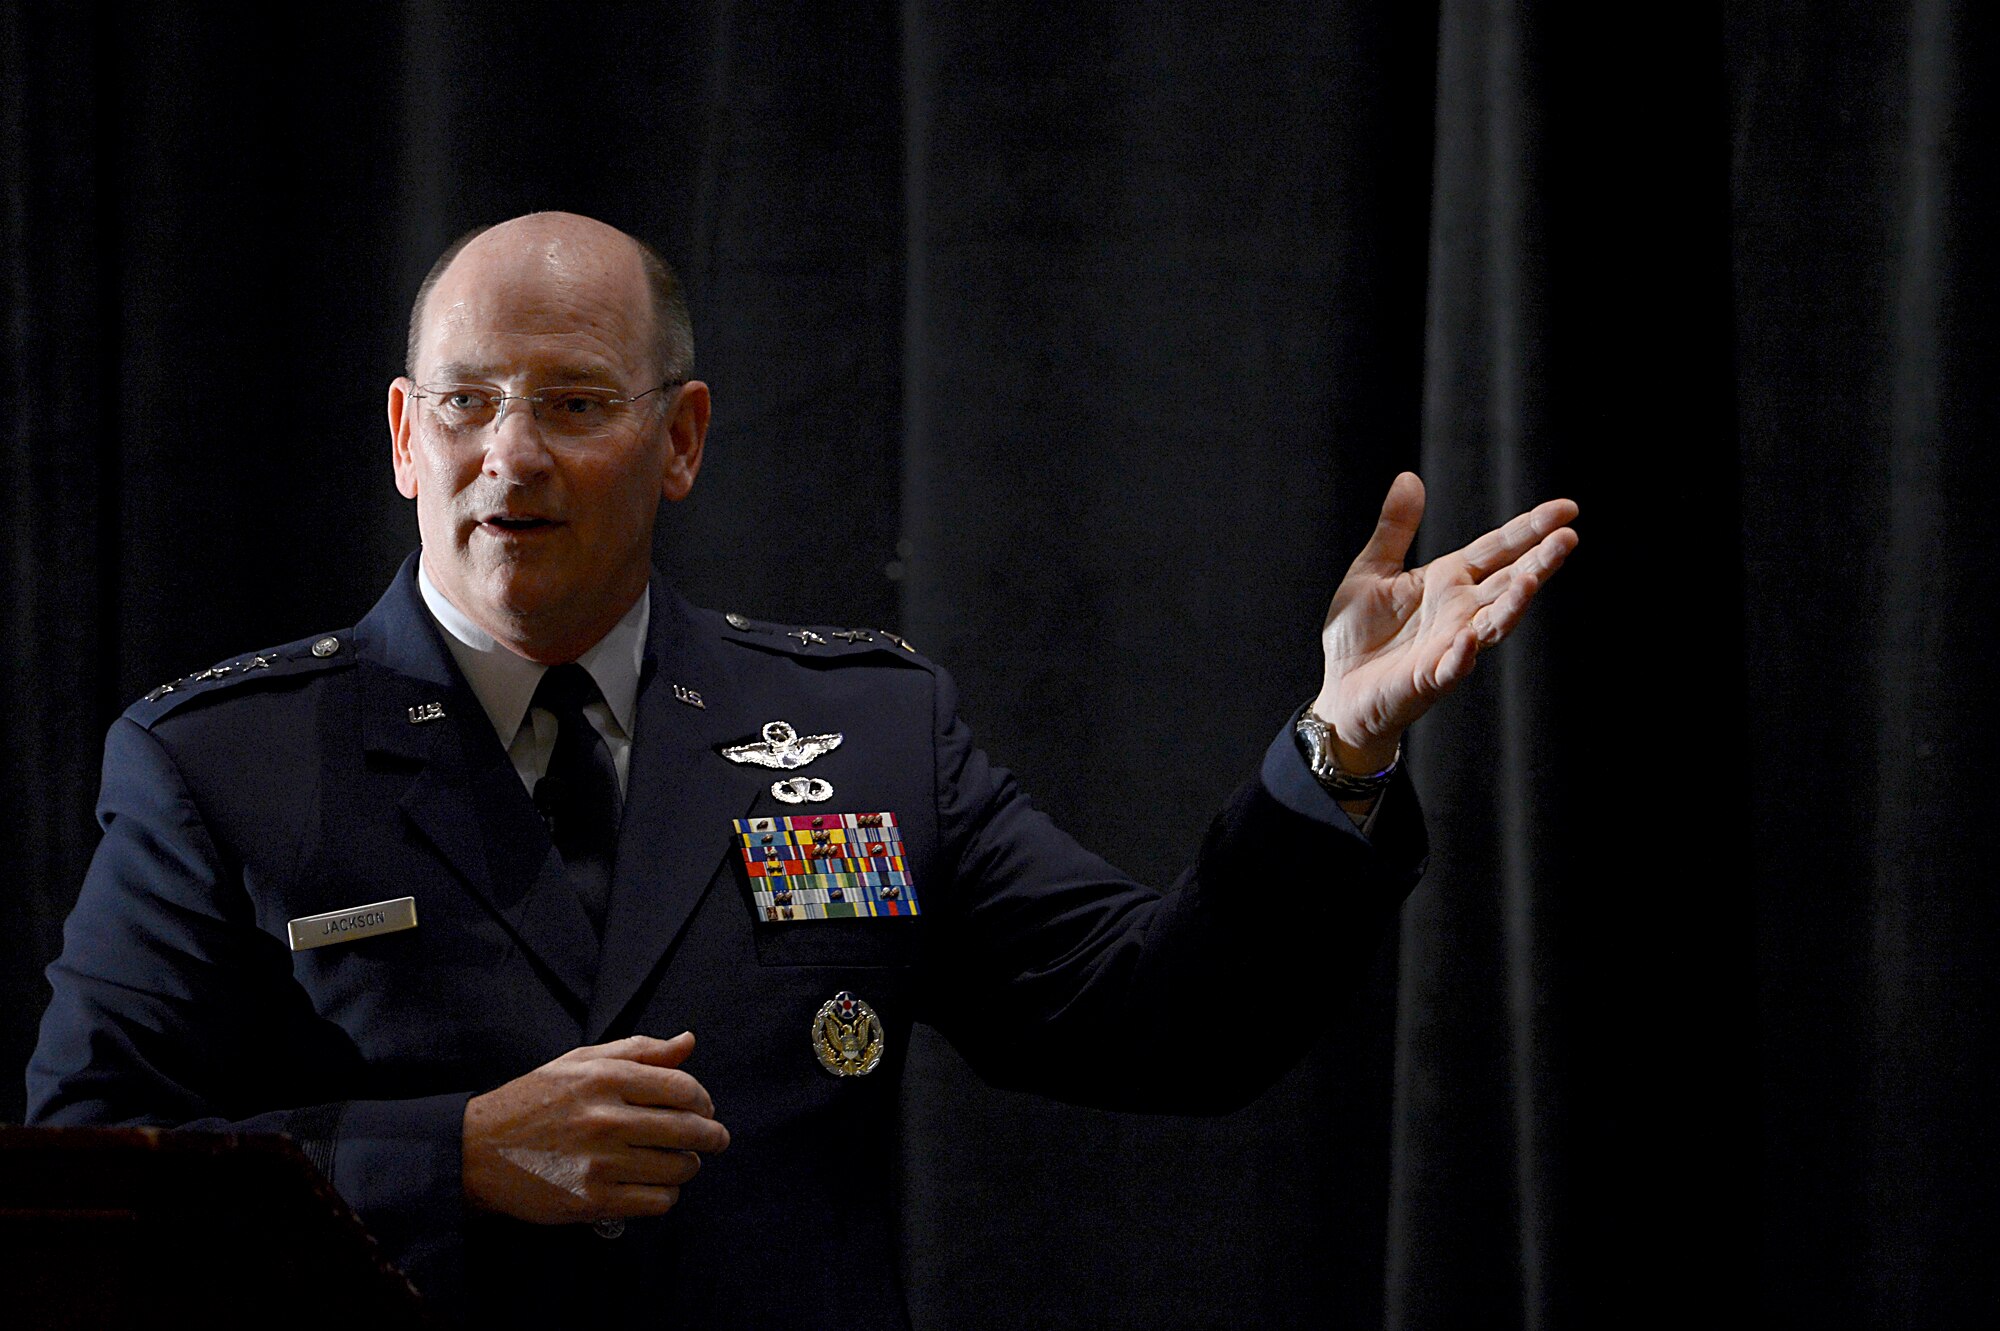 Chief of the Air Force Reserve Lt. Gen James F. Jackson, gives his insight on the reserve component during Air Force Association's Air and Space Conference and Technology Exposition, in Washington, D.C., Sept. 15, 2014.  (U.S. Air Force photo/Scott M. Ash)